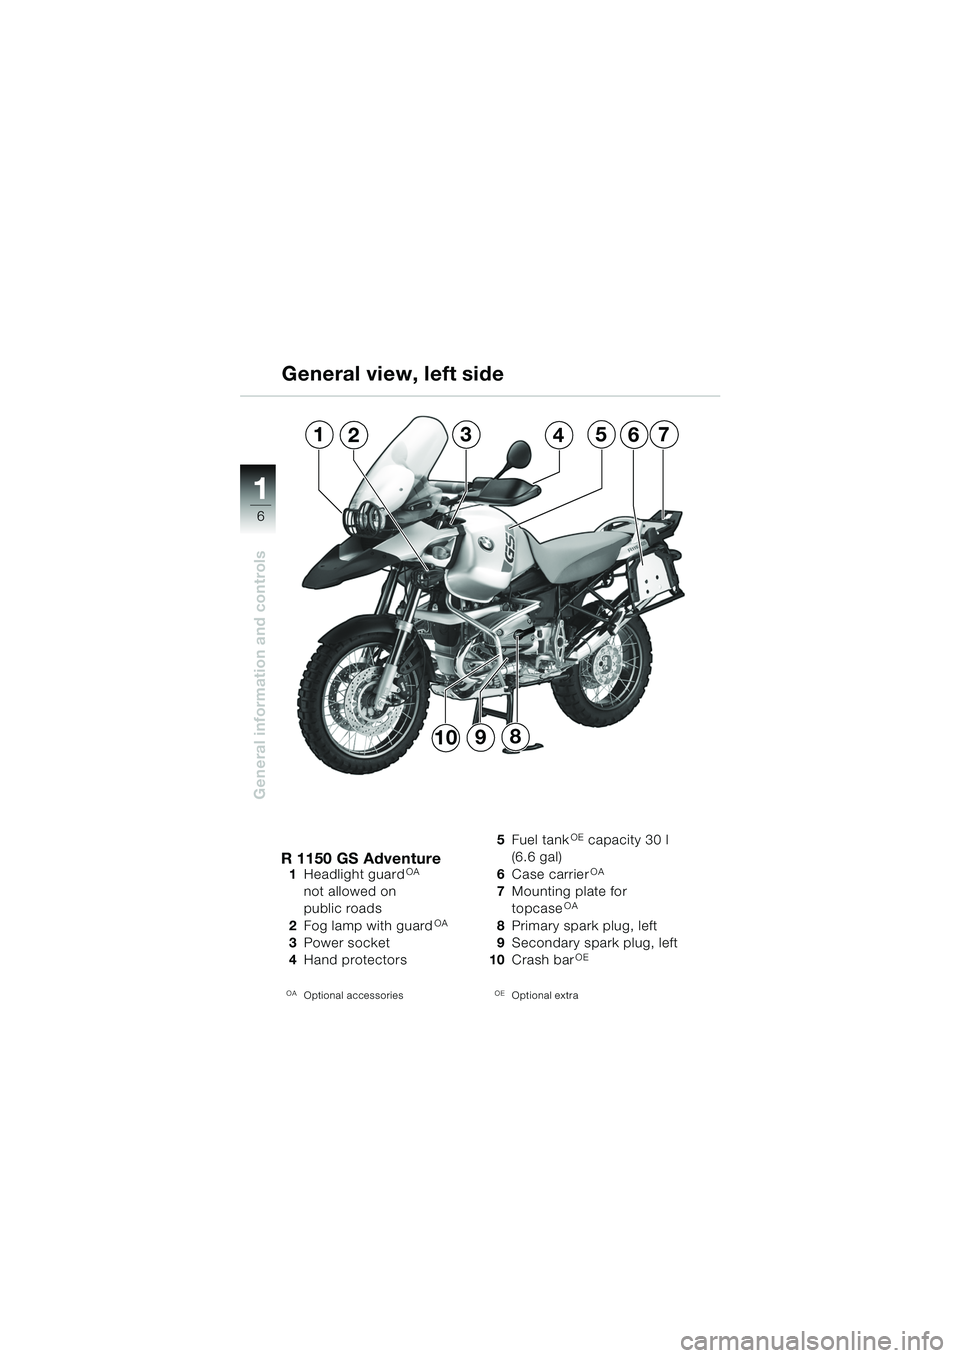 BMW MOTORRAD R 1150 GS Adventure 2002  Riders Manual (in English) 11
6
General information and controls
1235764
8910
R 1150 GS Adventure1 Headlight  guardOA 
not allowed on
public roads
2 Fog lamp with guard
OA
3Power socket 
4 Hand protectors
OAOptional accessories